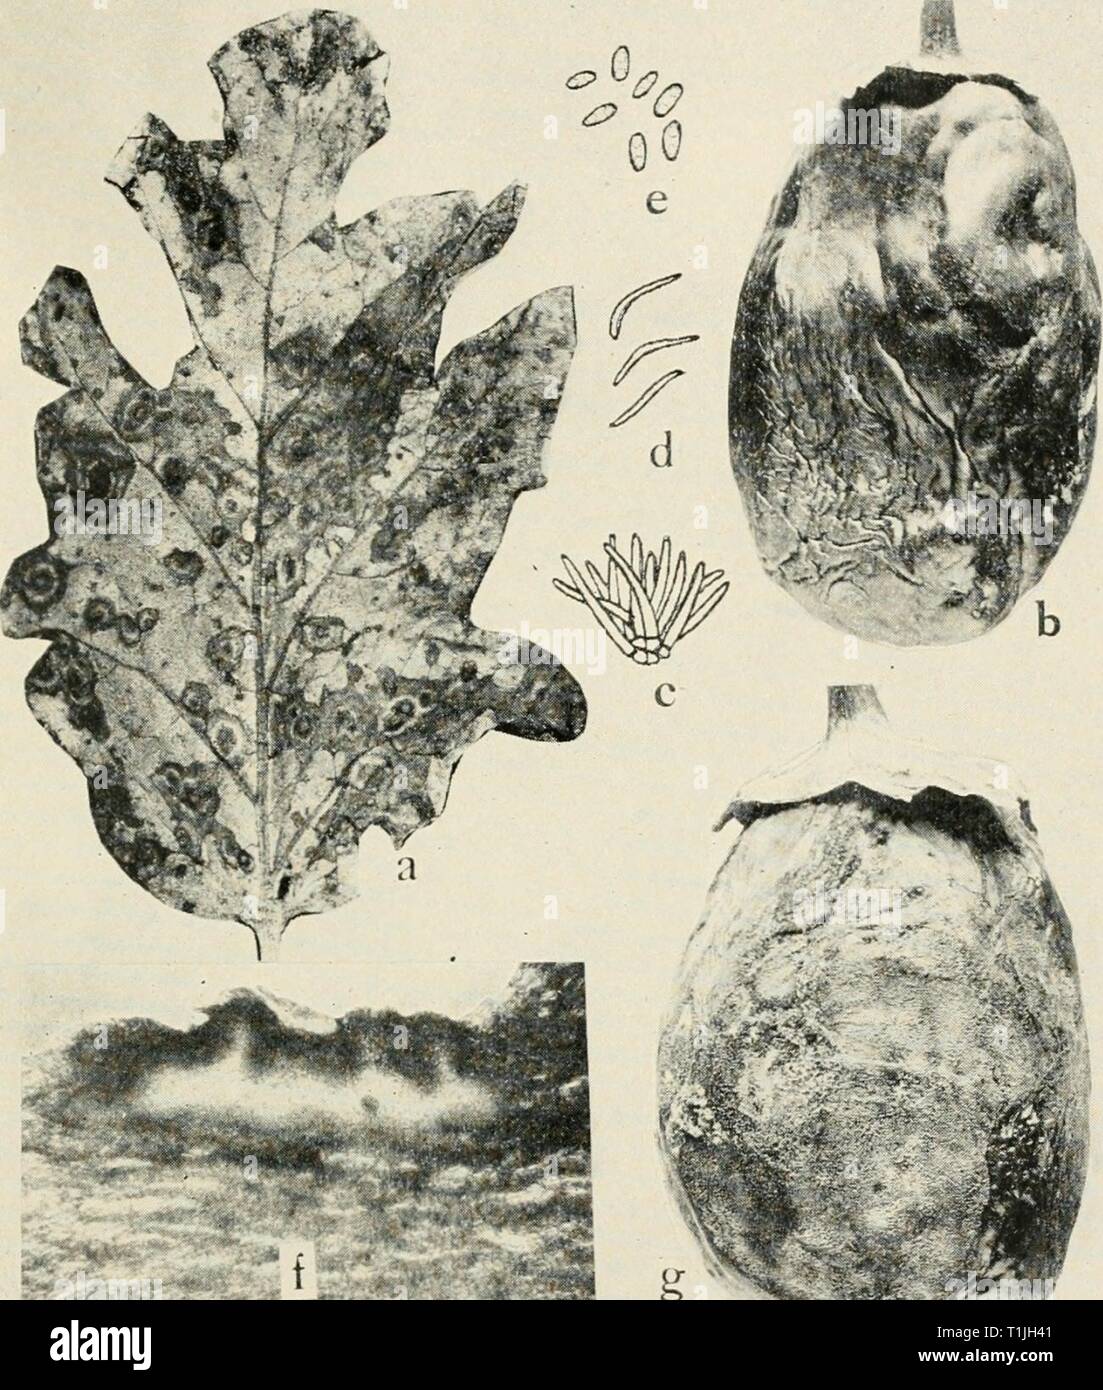 Diseases of truck crops and Diseases of truck crops and their control  diseasesoftruckc00taubuoft Year: [1918]  Fig. 56. Egg-Plant Diseases. a. Phomopsis of leaf, 6. Phomopsis on fruit, c. conidiophores, rf. stylospores, e. pycnospores of Phomopsis vexans, f. photomicrograph of a cross section through an infected calyx of an egg plant showing pycnidia of P. vexans (c. to f. after Harter), g.. anthracnose on egg-plant fruit. Stock Photo